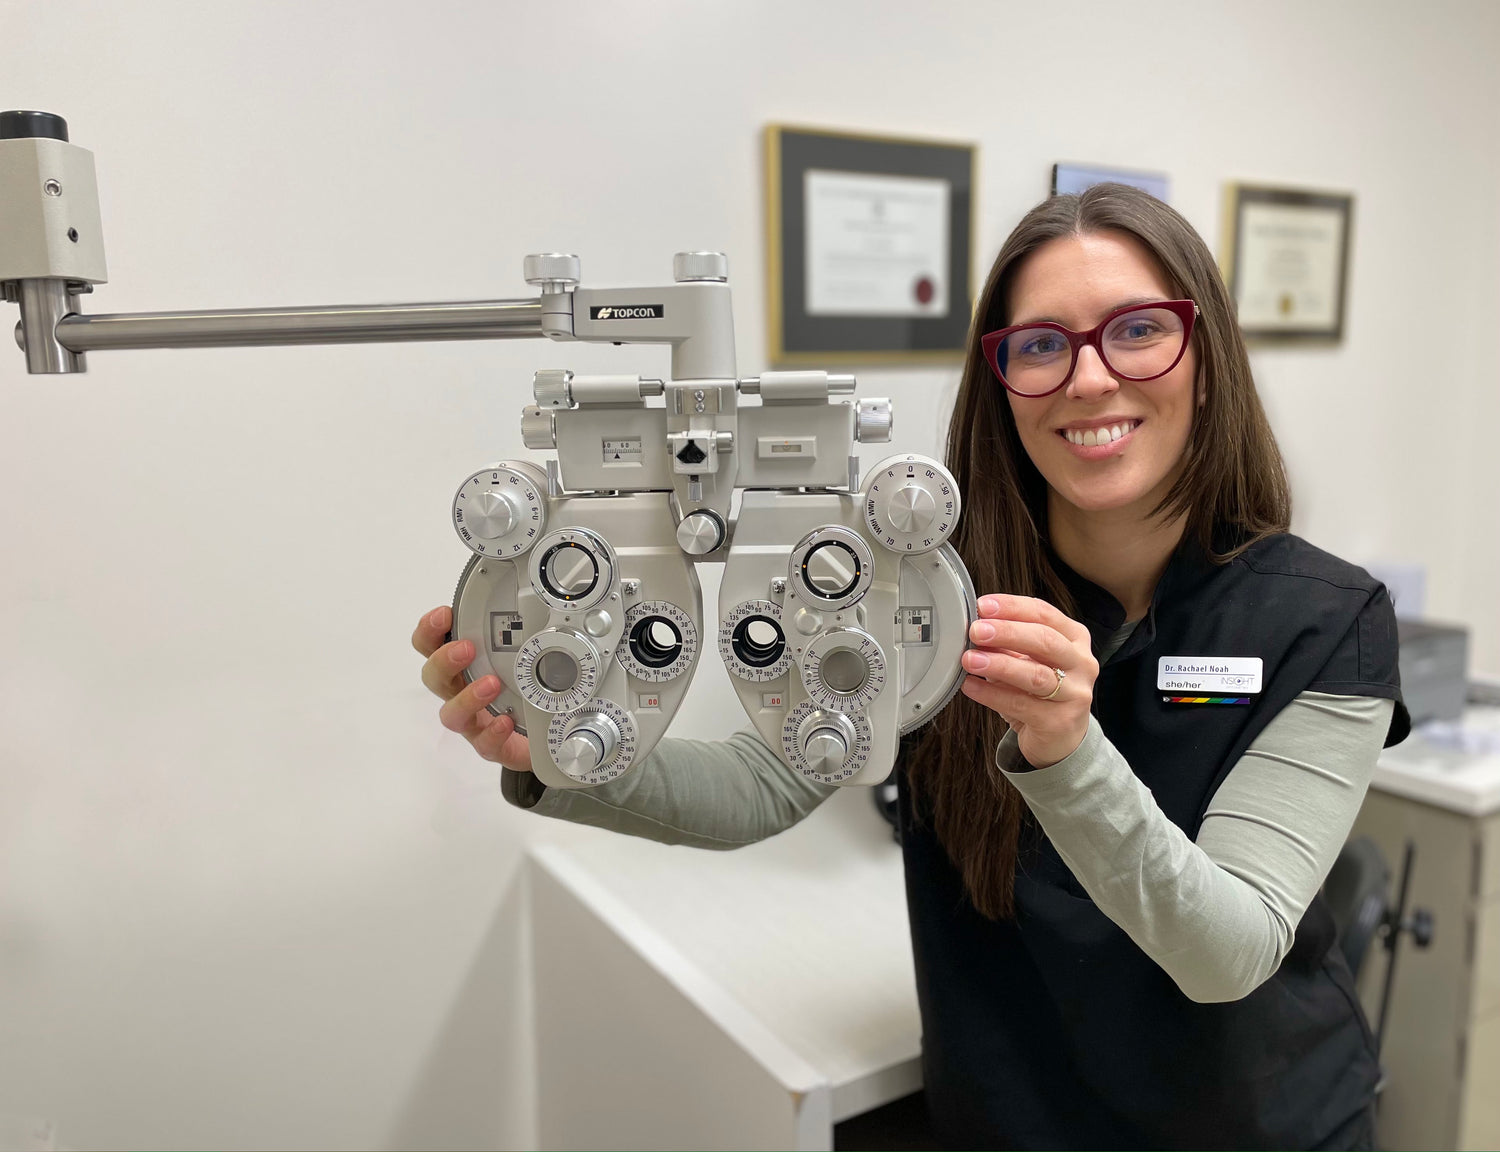 Dr Rachael Noah, smiling, in an eye exam room holding up an photropter instrument used to measure glasses prescriptions.